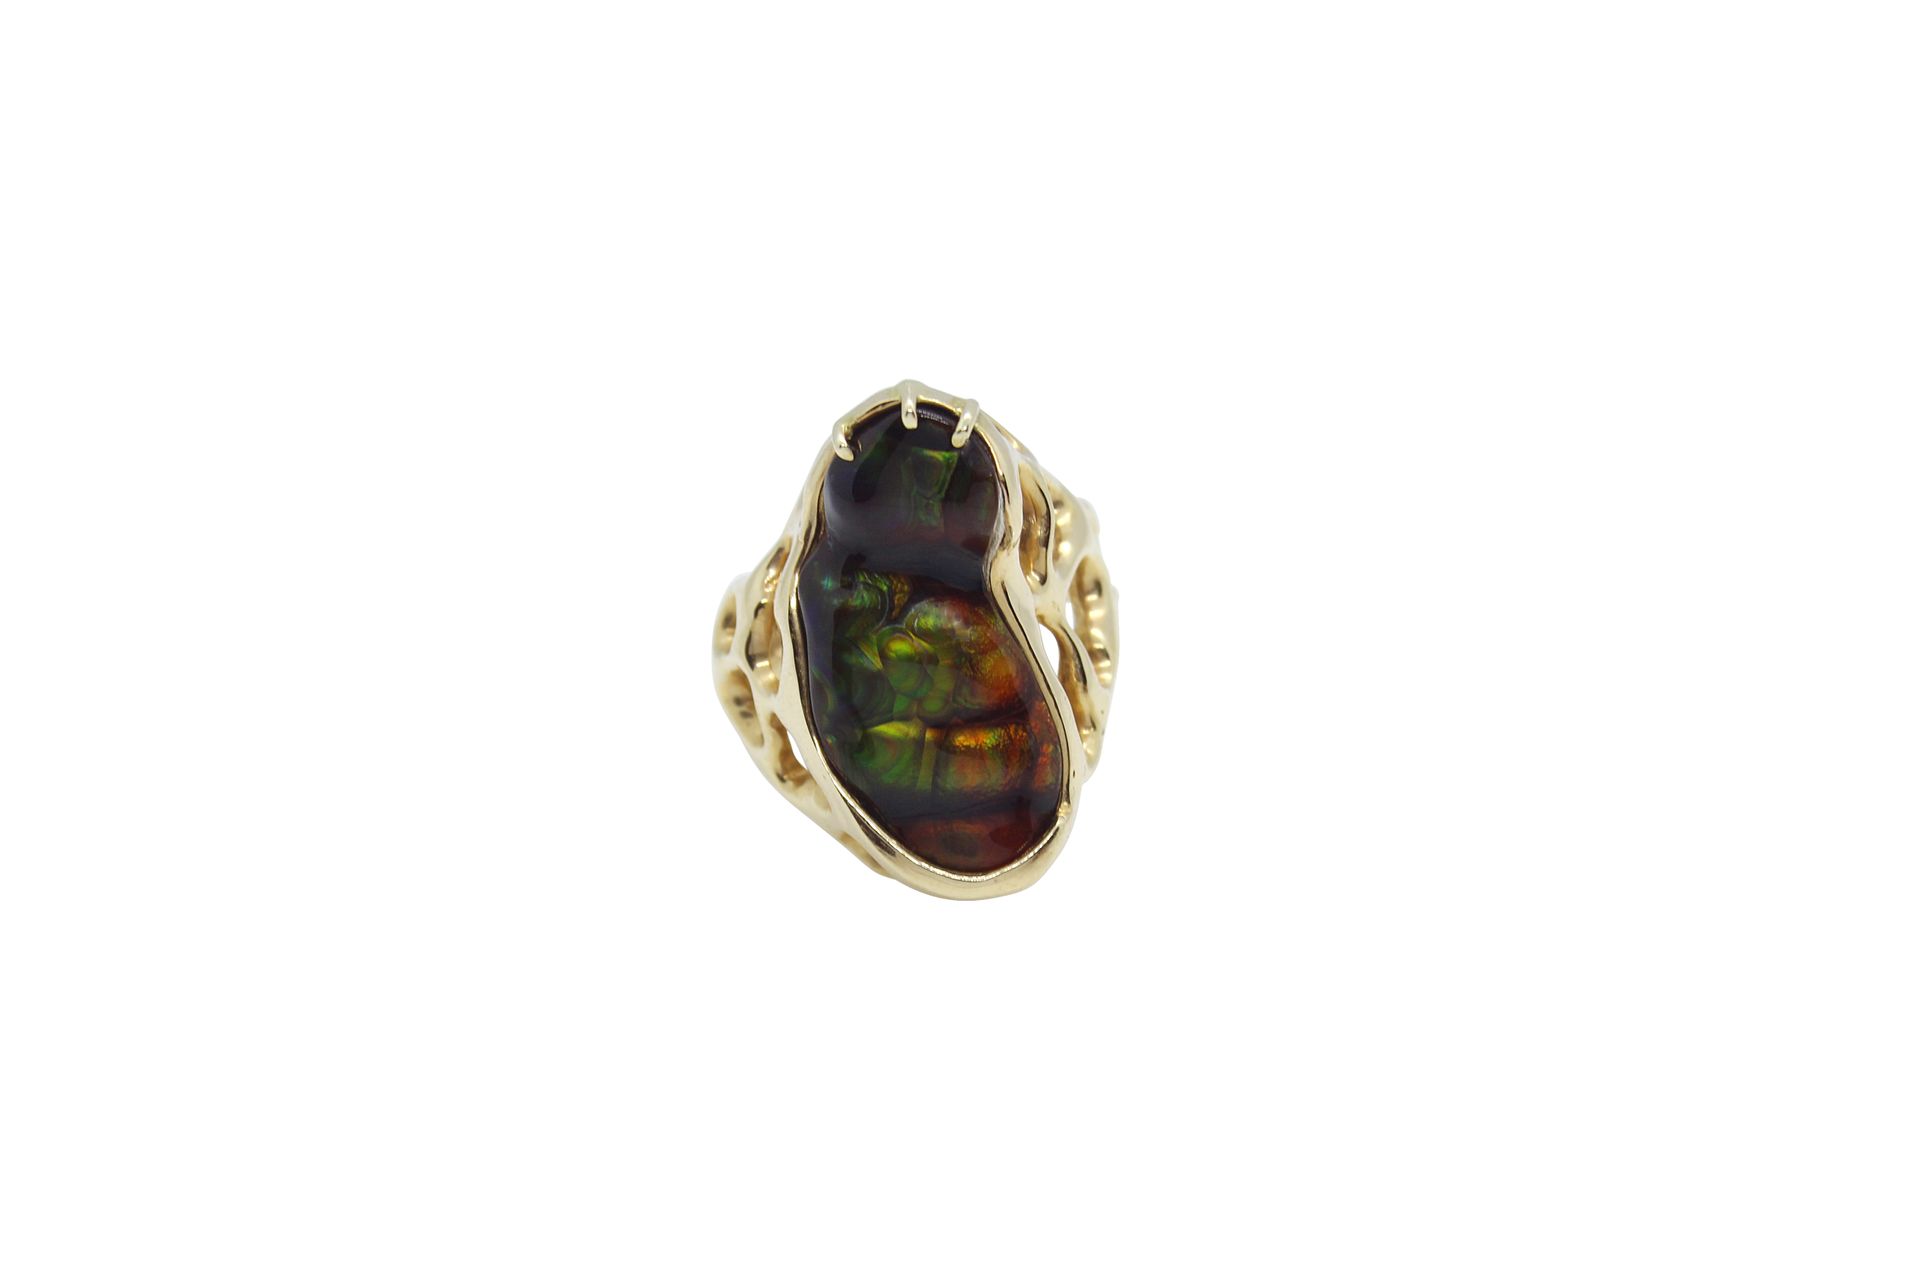 18k gold ring with abalone 18k gold ring with abalone. Gross weight approx. 16,5&hellip;